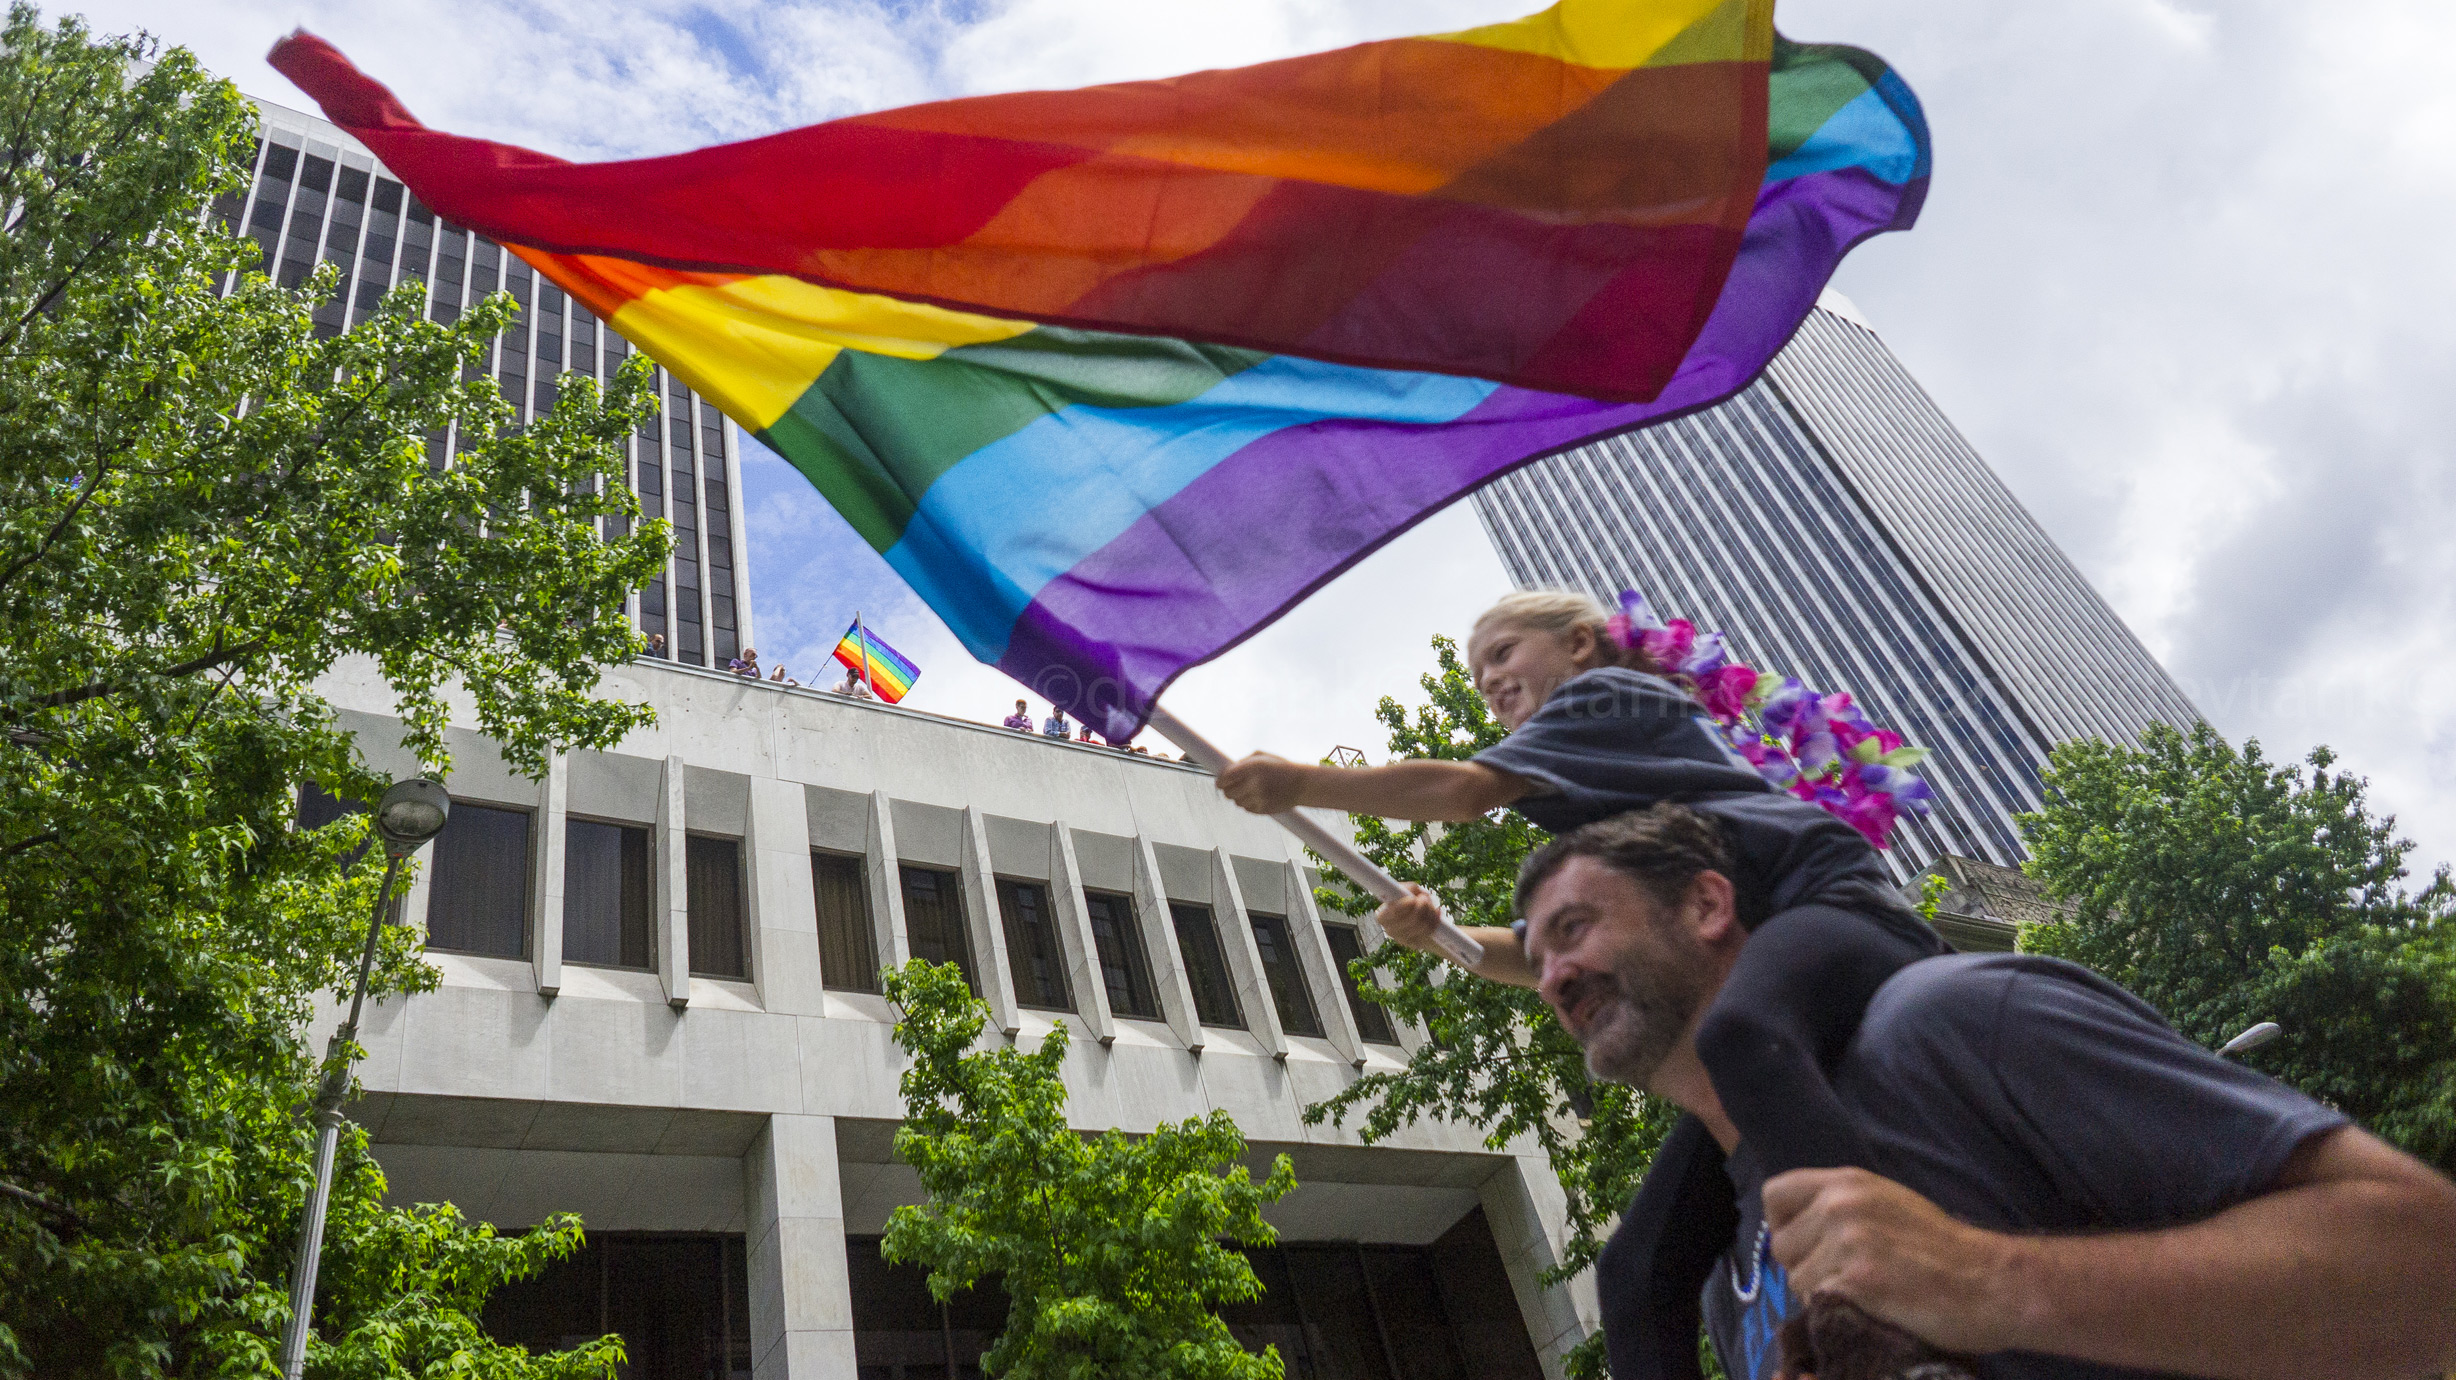 2014 Seattle Pride Festival has grown exponentially over the last decade. It now regularly attracts crowds in excess of four hundred thousand people. 